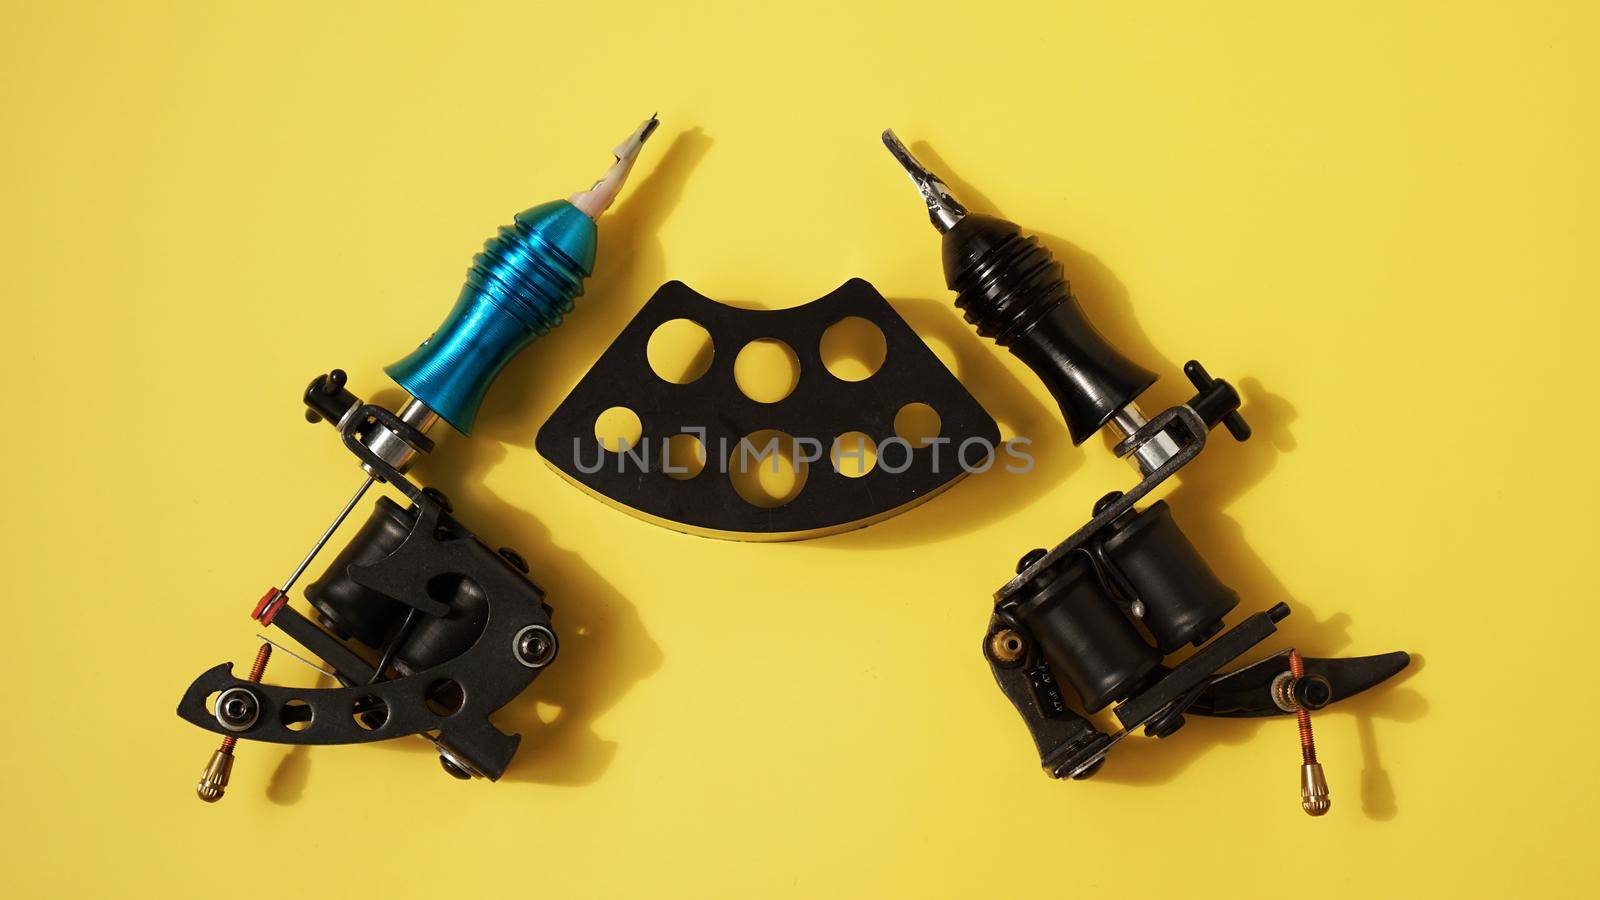 Tattoo equipment, tattoo ink plastic stand for tattoo ink caps and tattoo machines on yellow background